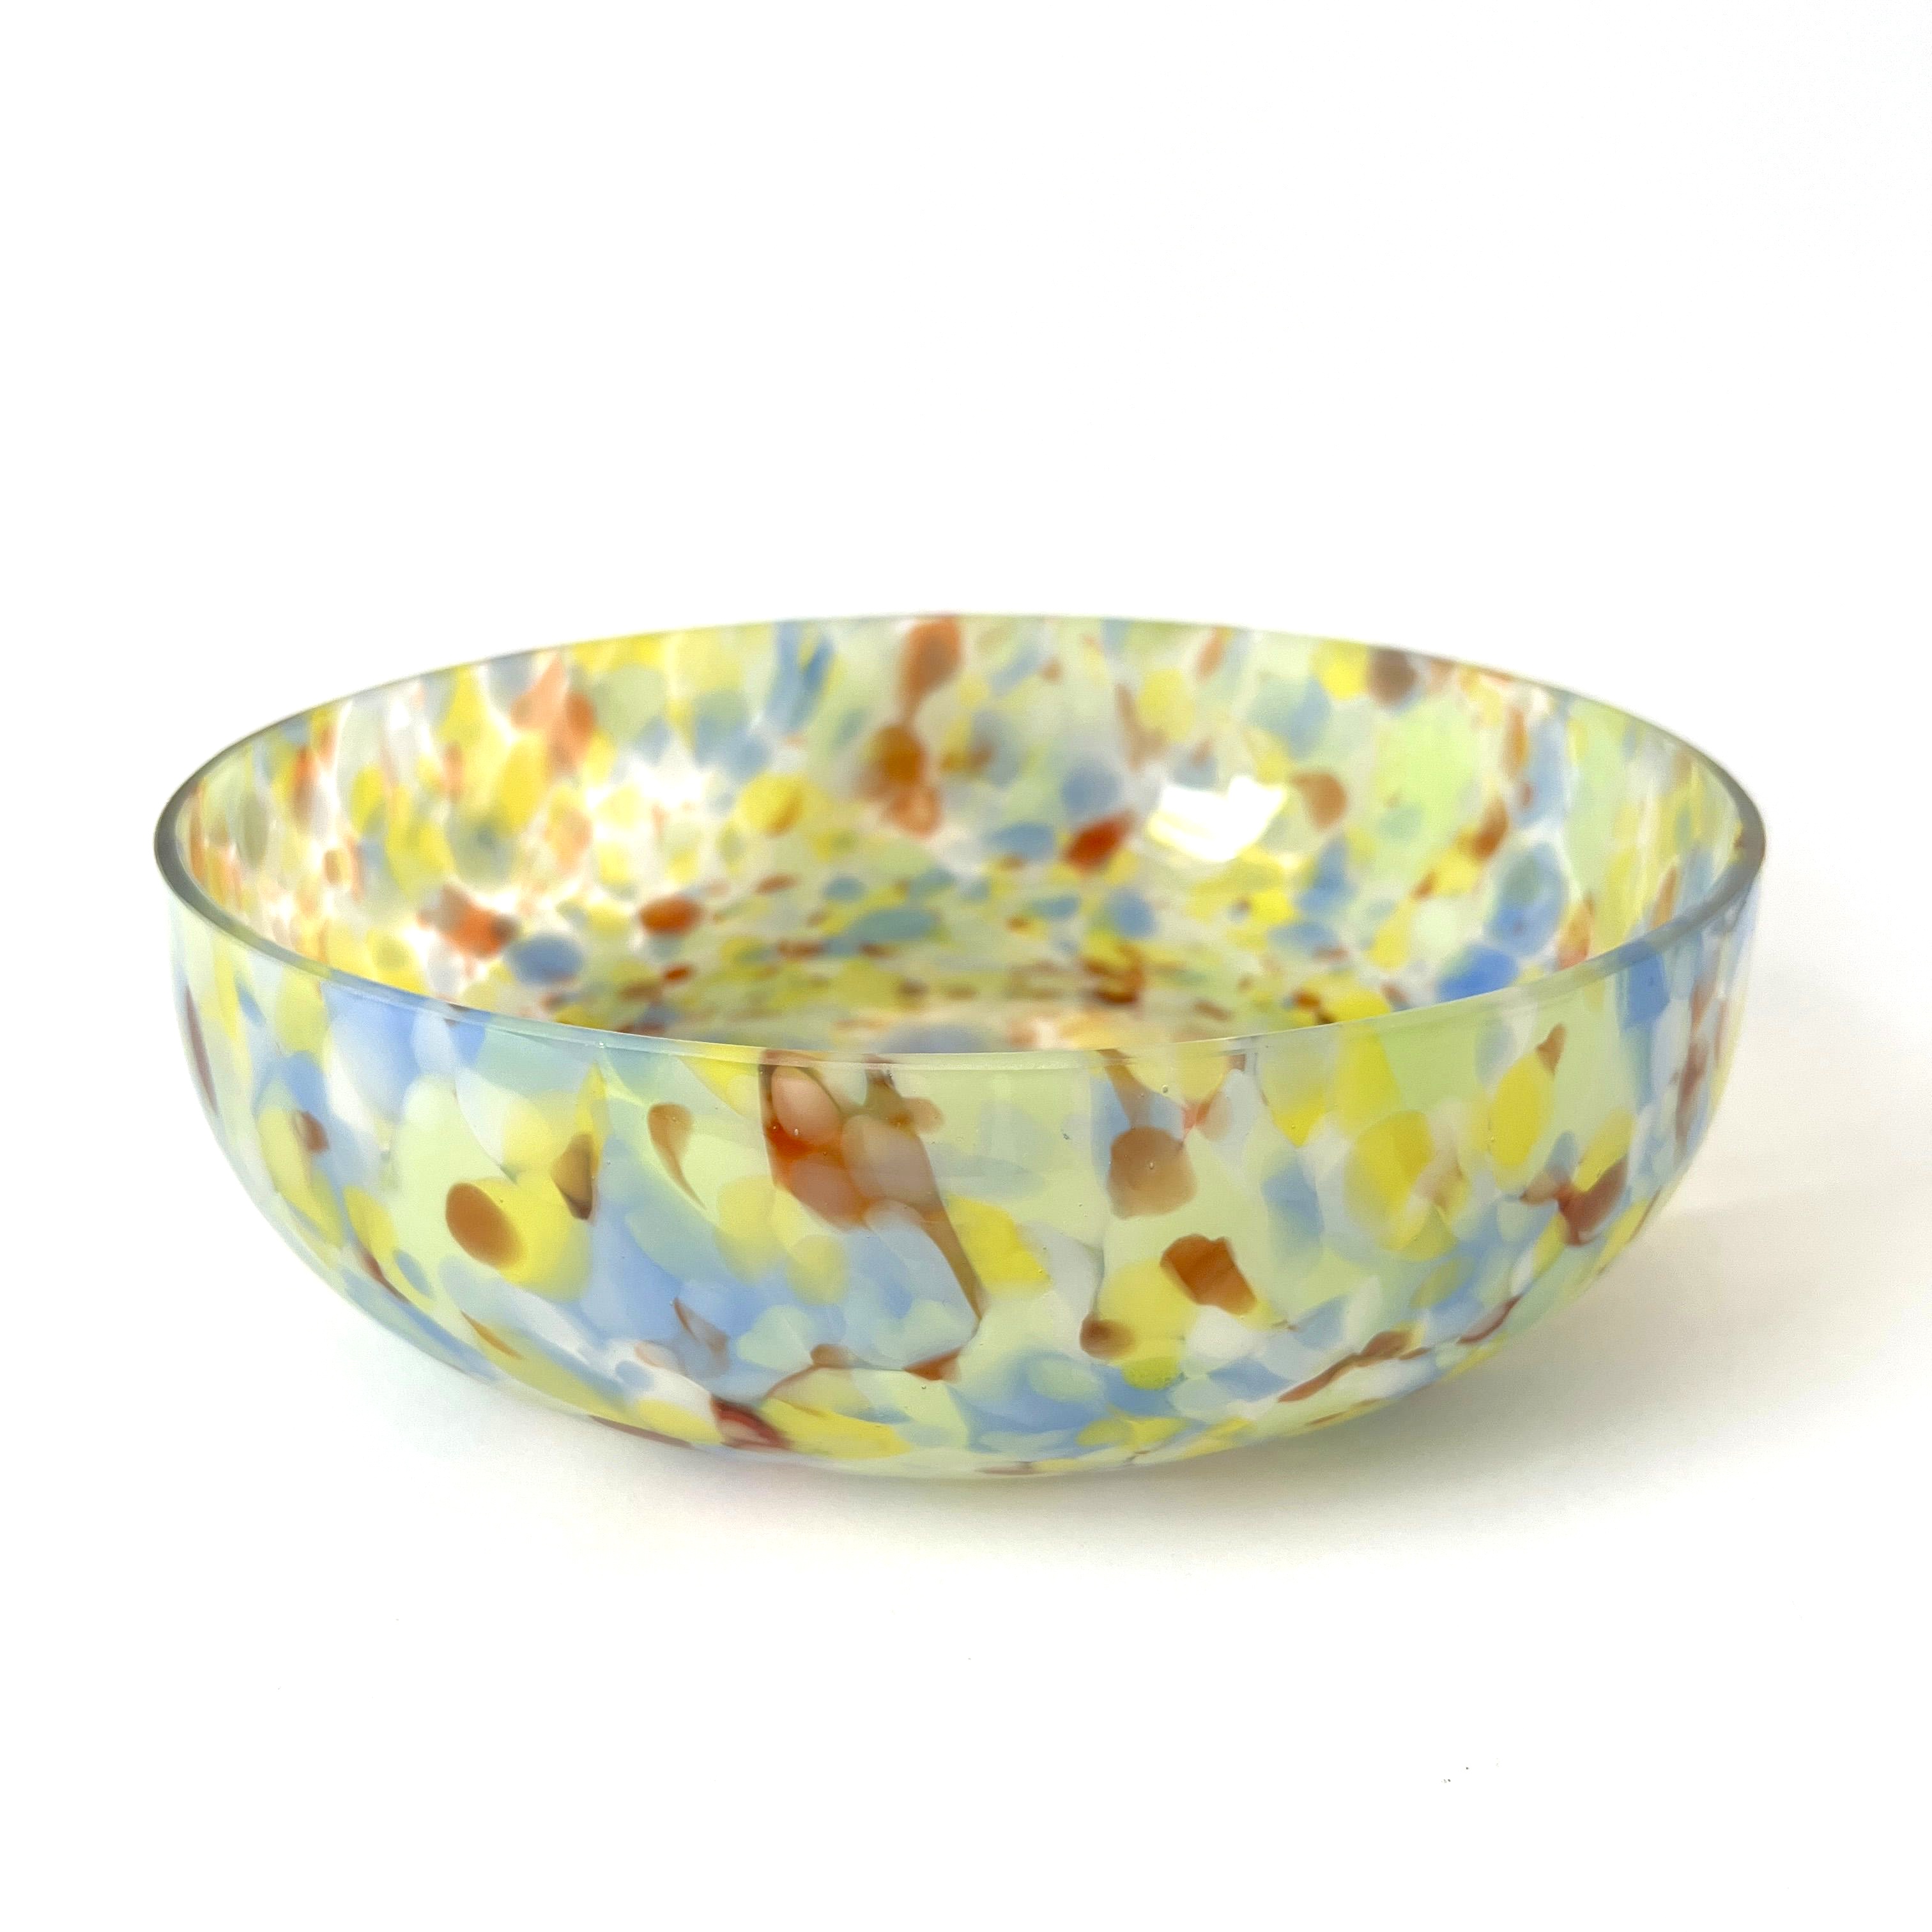 hubsch-large-confetti-glass-bowl